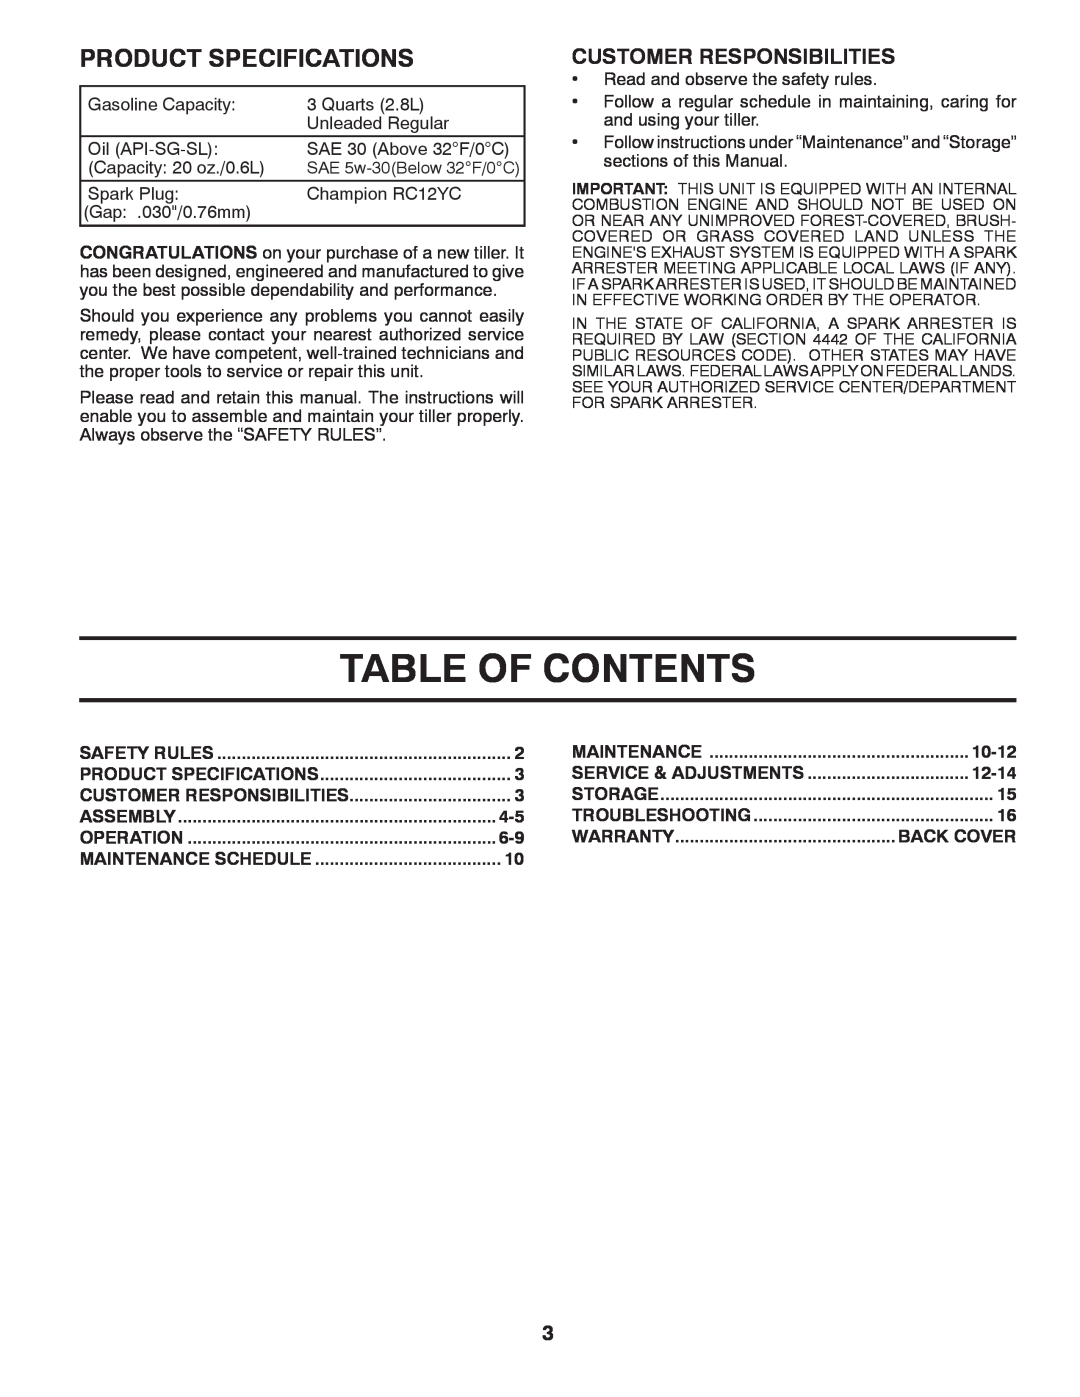 McCulloch MHDF800 manual Table Of Contents, Product Specifications, Customer Responsibilities, 10-12, 12-14, Back Cover 